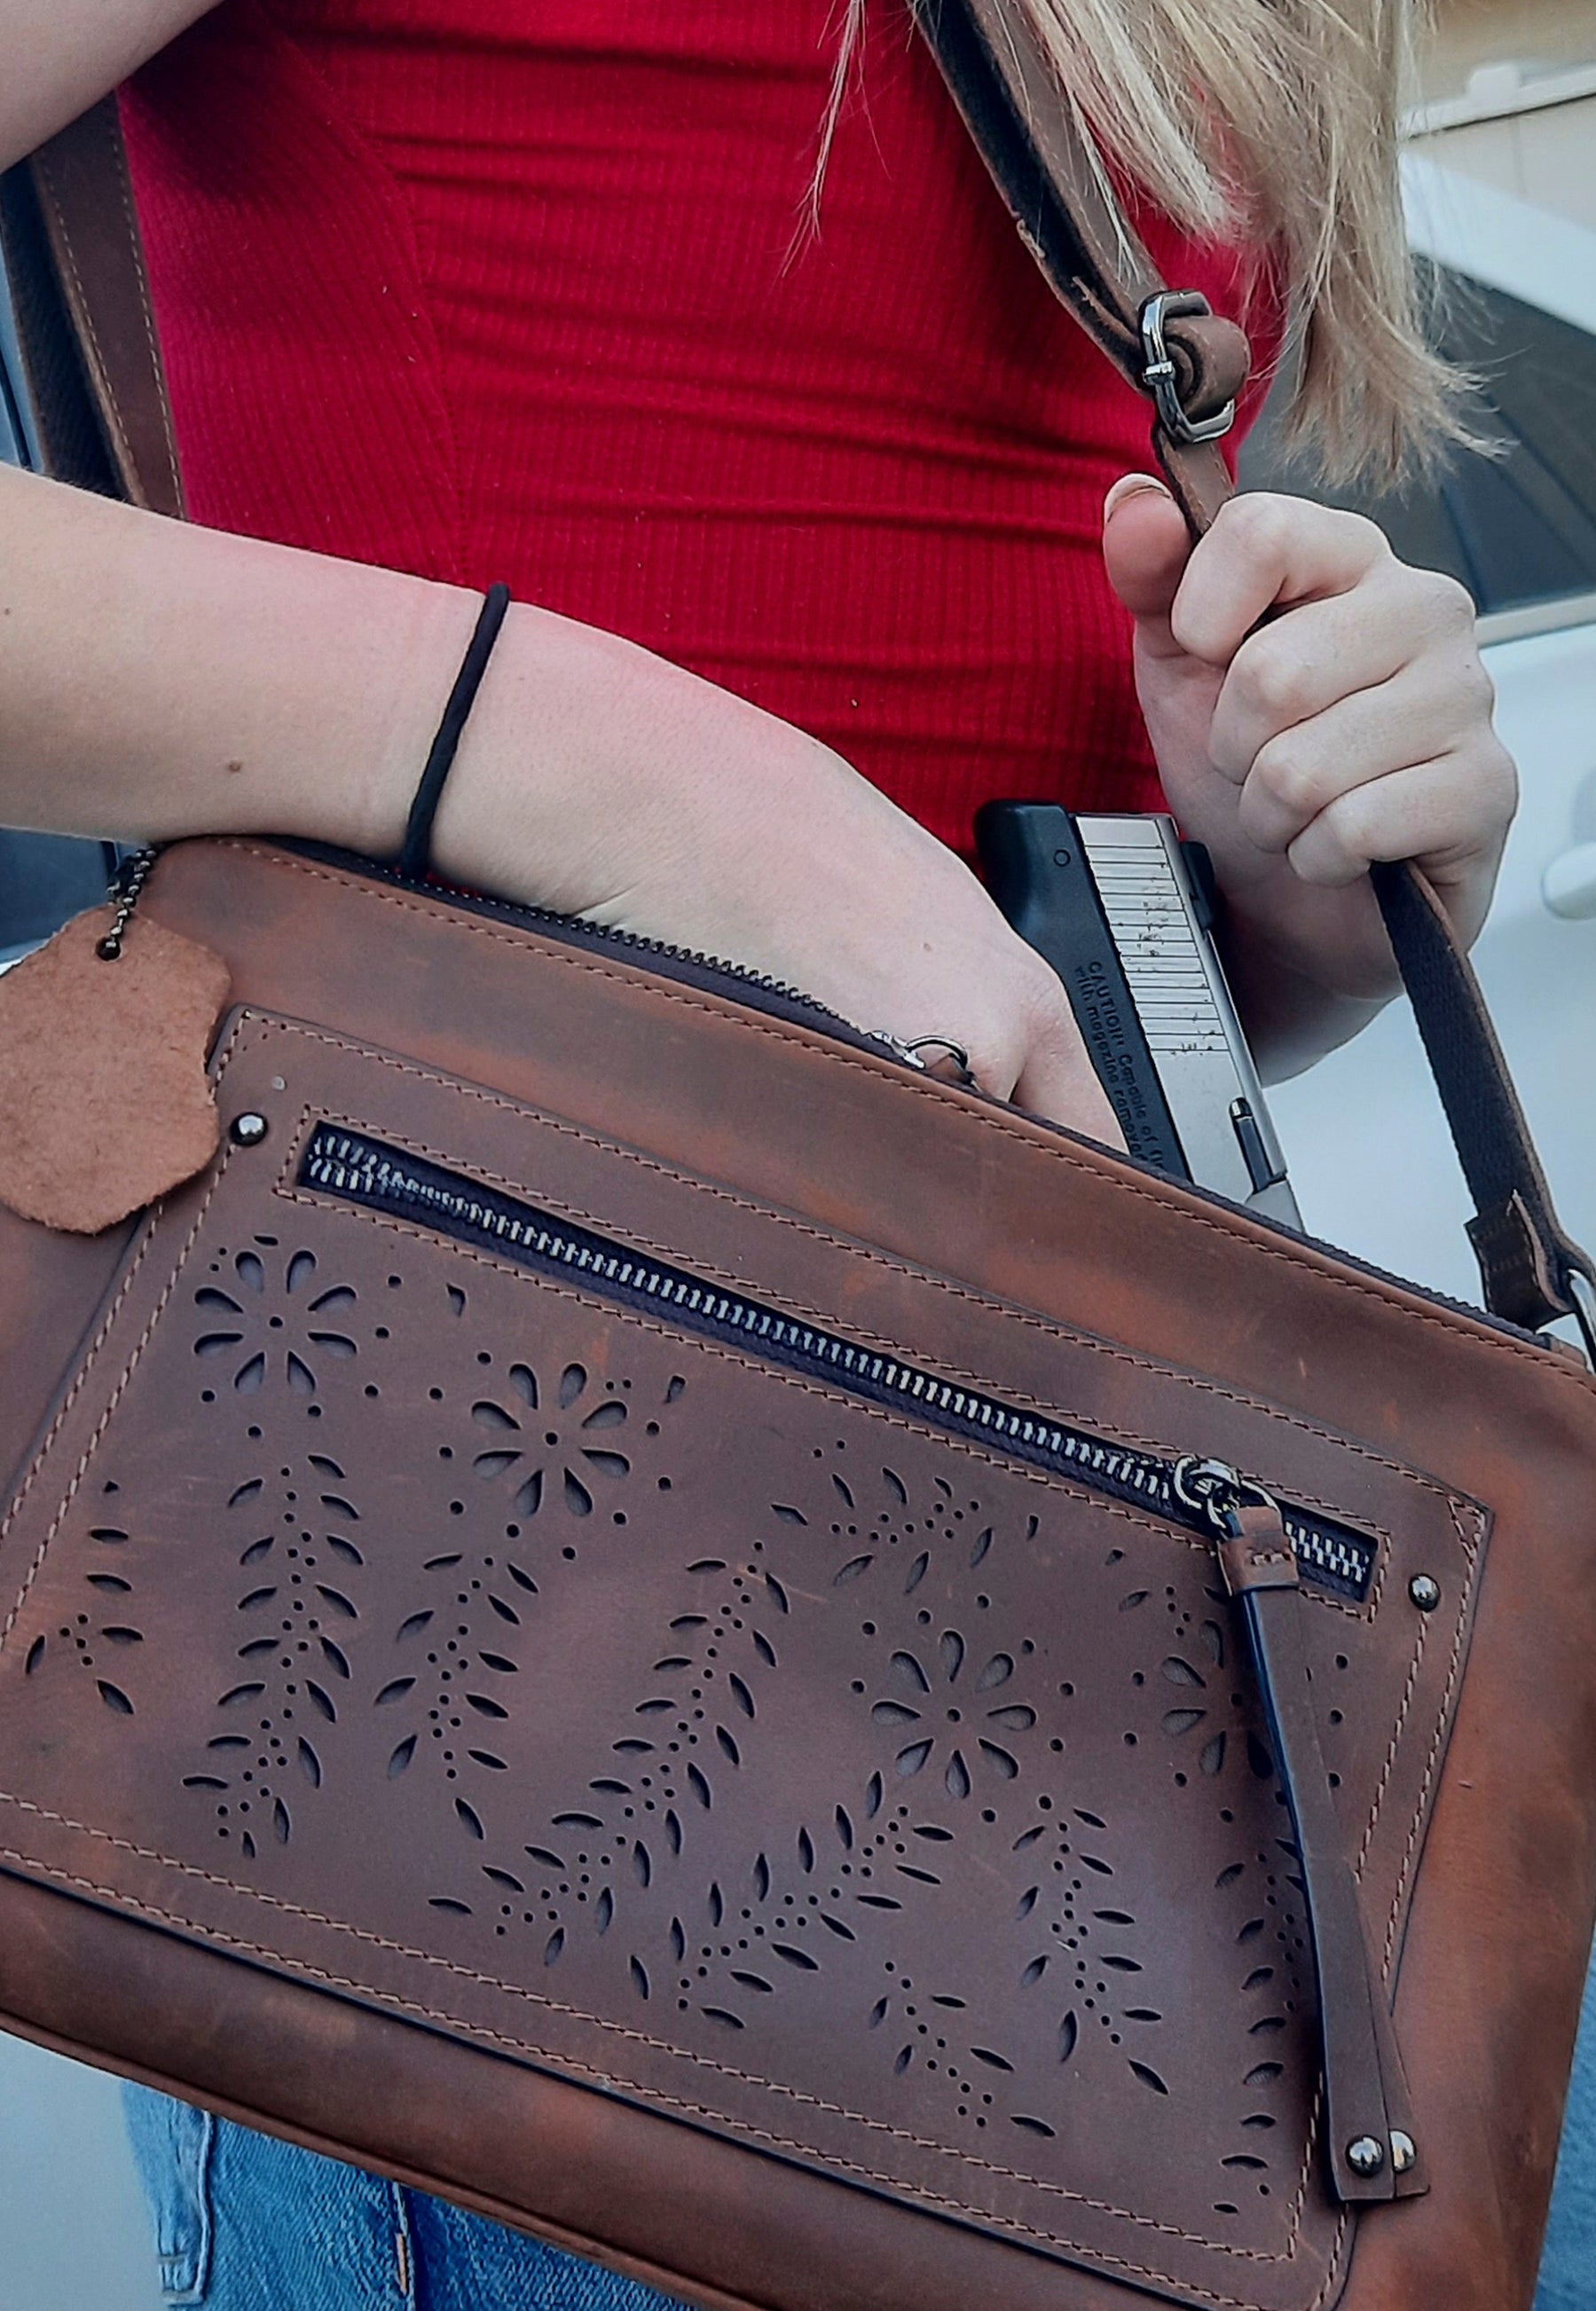 Moonstruck Leather Concealed Carry Purses - Fun day at the famous Ft Worth  Stockyards! Find this and more at👇 #moonstruckleather .com #handcrafted  #madeinusa #concealedcarry #handbags #leather #cowhide #proud #American  #fringe #Laredo #beautiful |